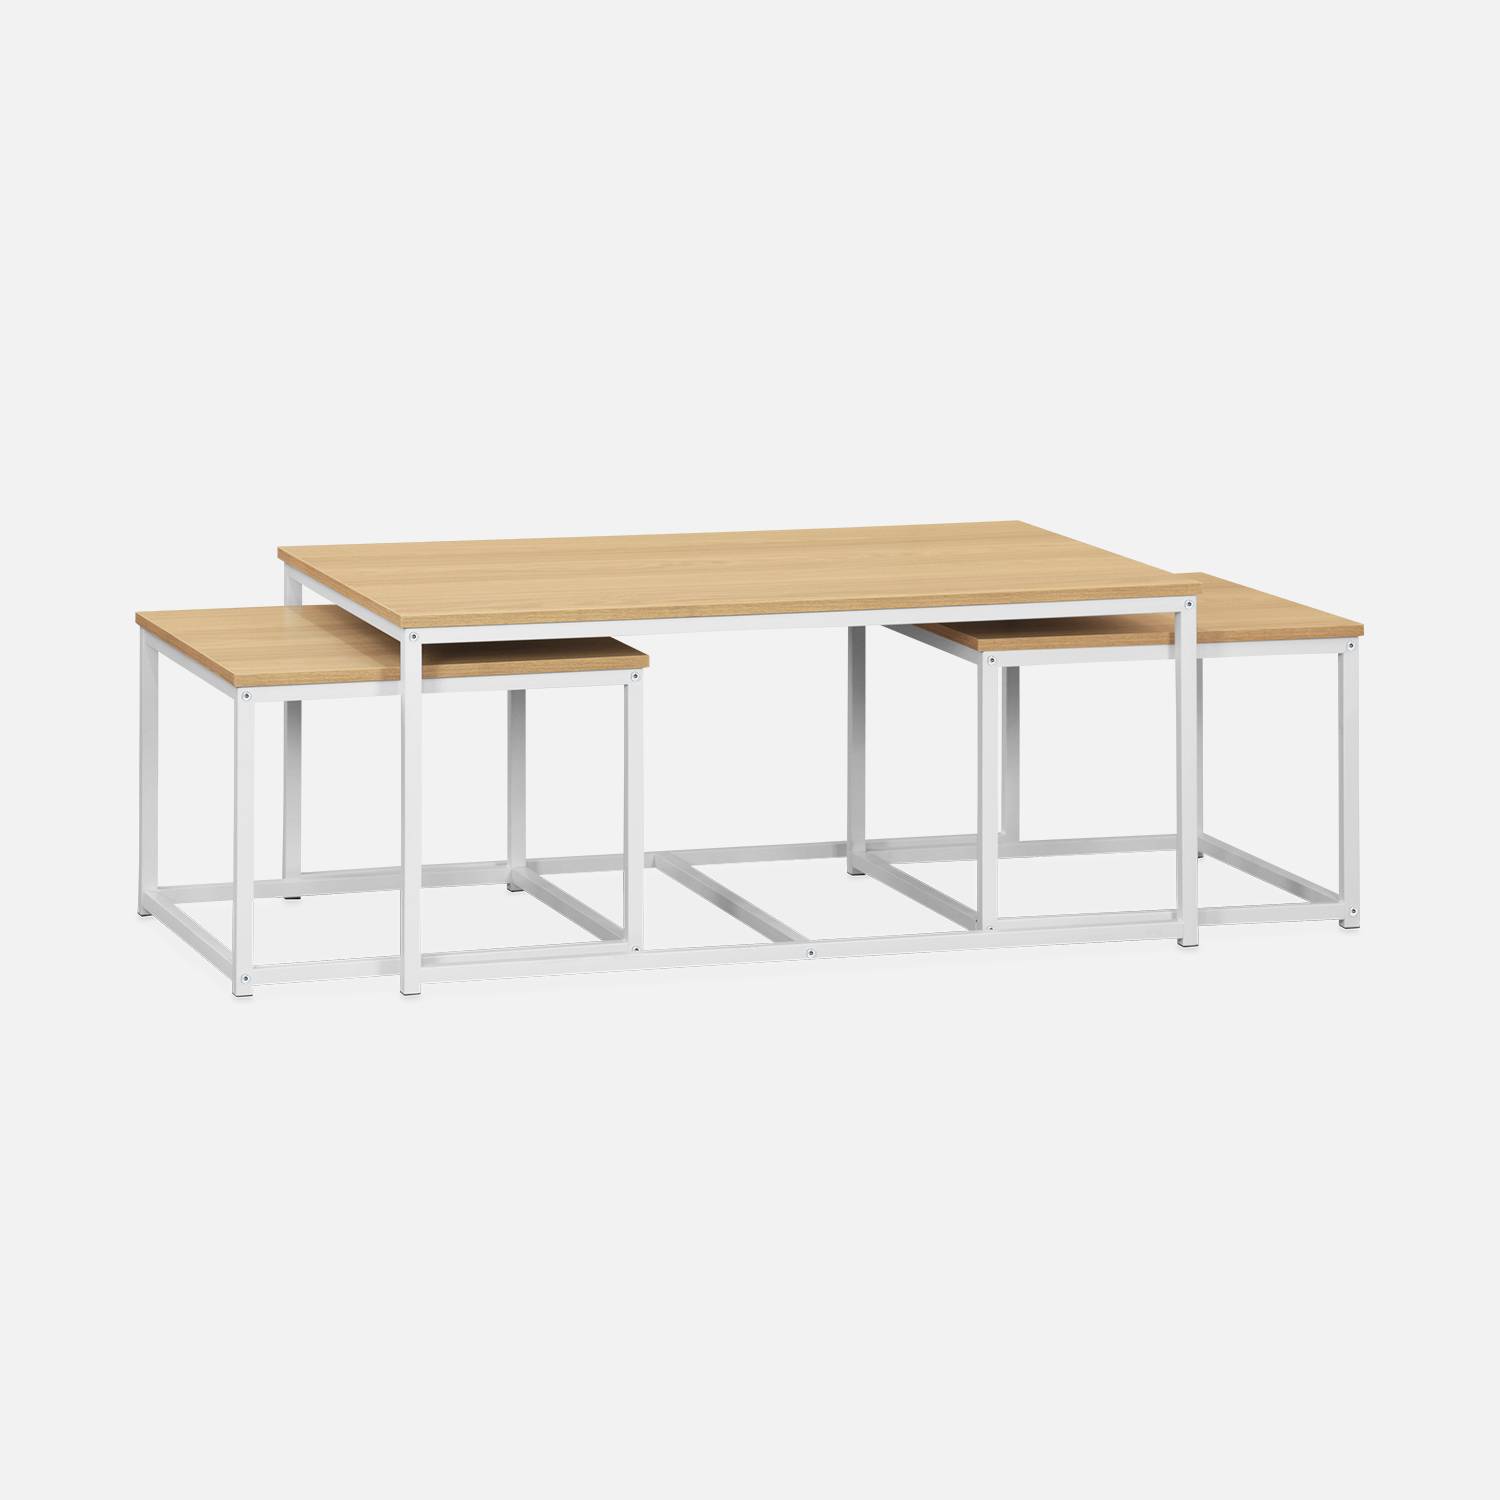 Set of 3 metal and wood-effect nesting tables, large table:100x60x45cm, 2 x small tables:50x50x38cm - Loft - White,sweeek,Photo2